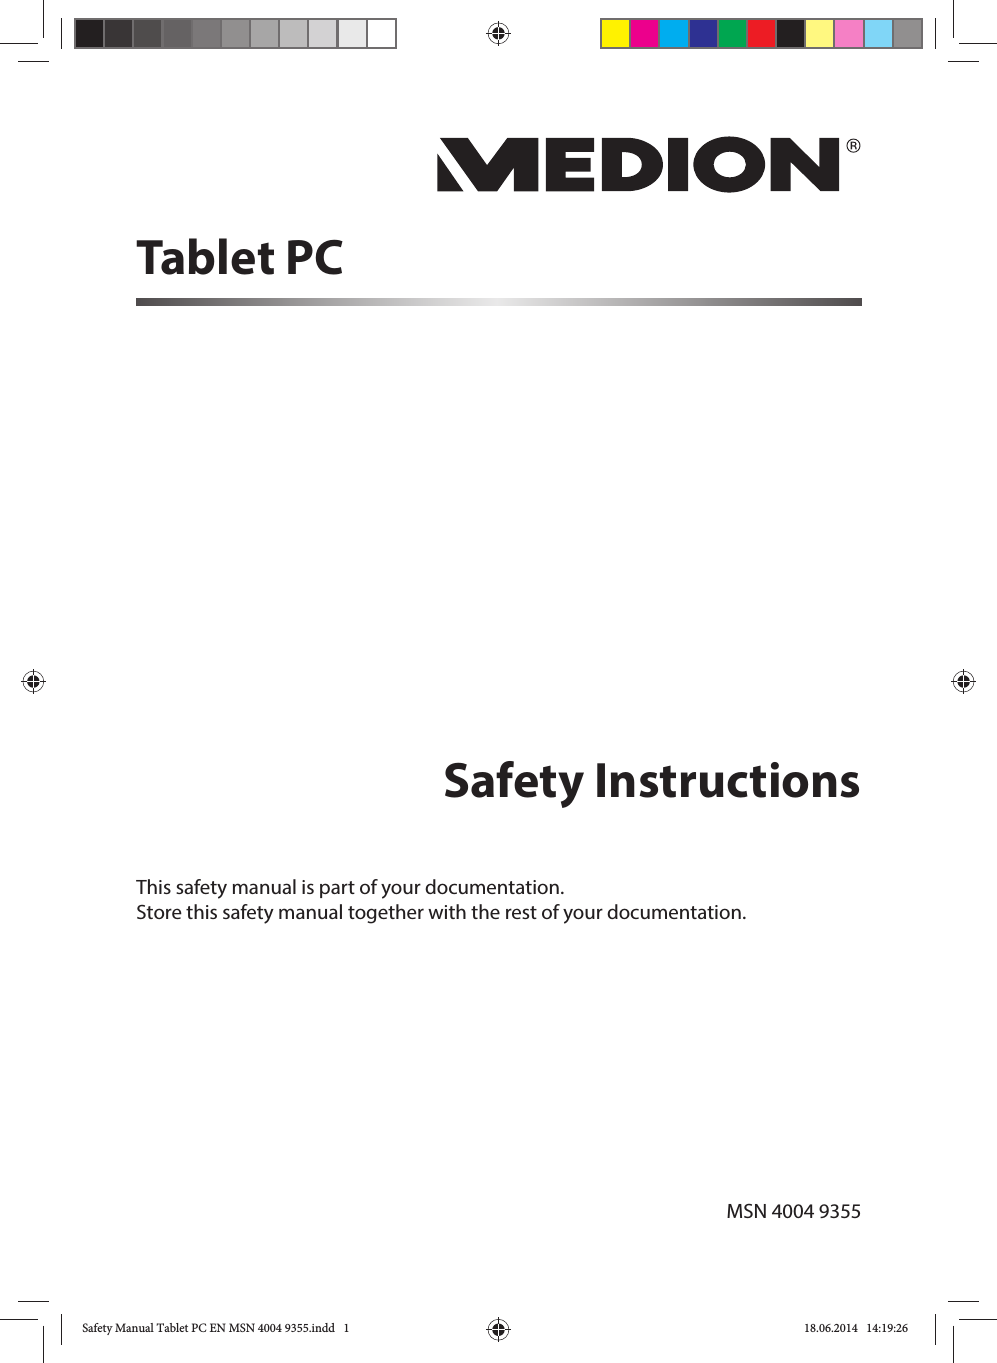 Safety InstructionsThis safety manual is part of your documentation. Store this safety manual together with the rest of your documentation.Tablet PCMSN 4004 9355Safety Manual Tablet PC EN MSN 4004 9355.indd   1Safety Manual Tablet PC EN MSN 4004 9355.indd   1 18.06.2014   14:19:2618.06.2014   14:19:26